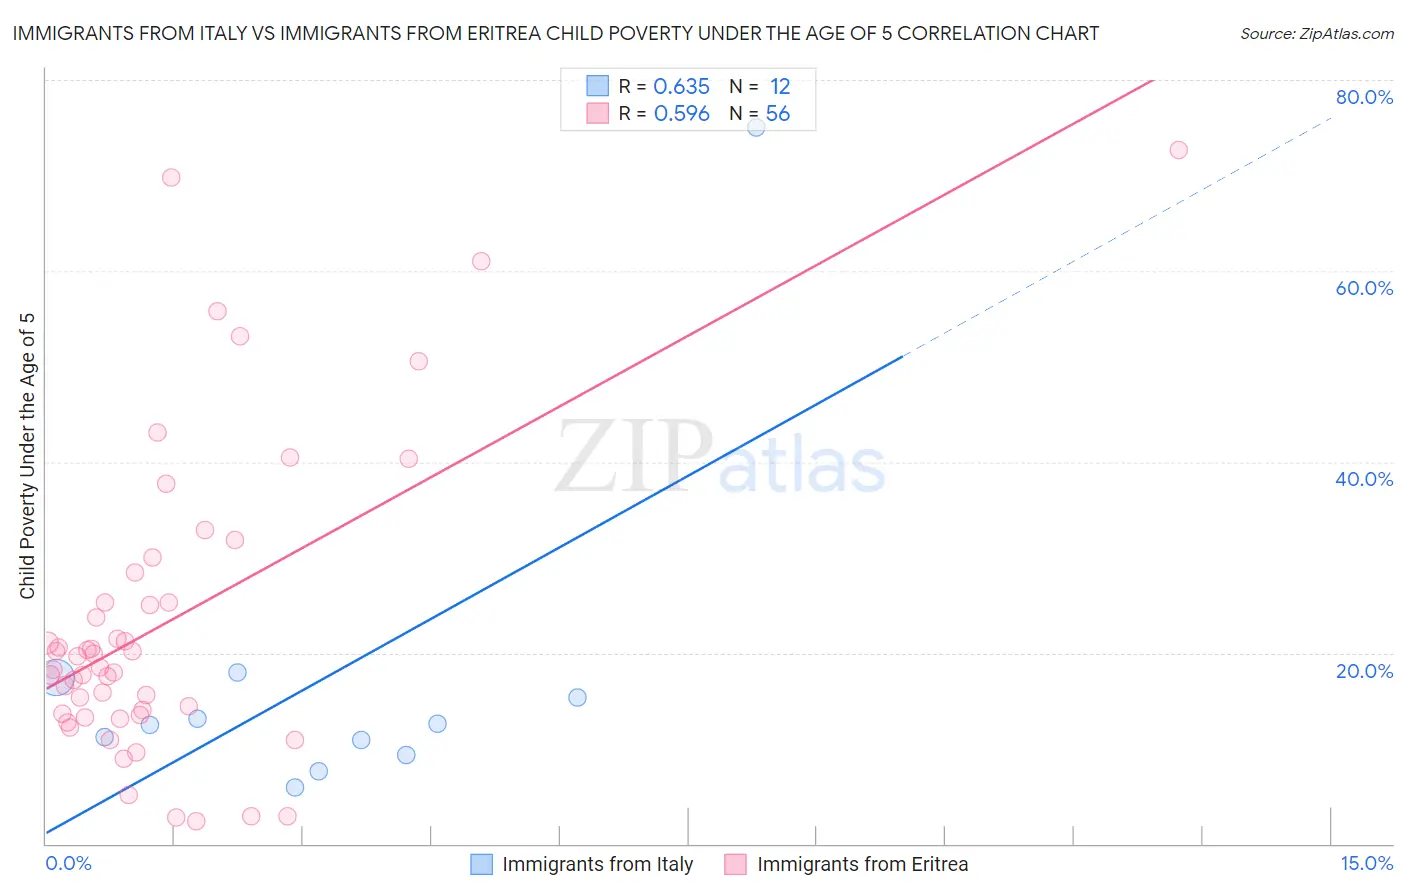 Immigrants from Italy vs Immigrants from Eritrea Child Poverty Under the Age of 5